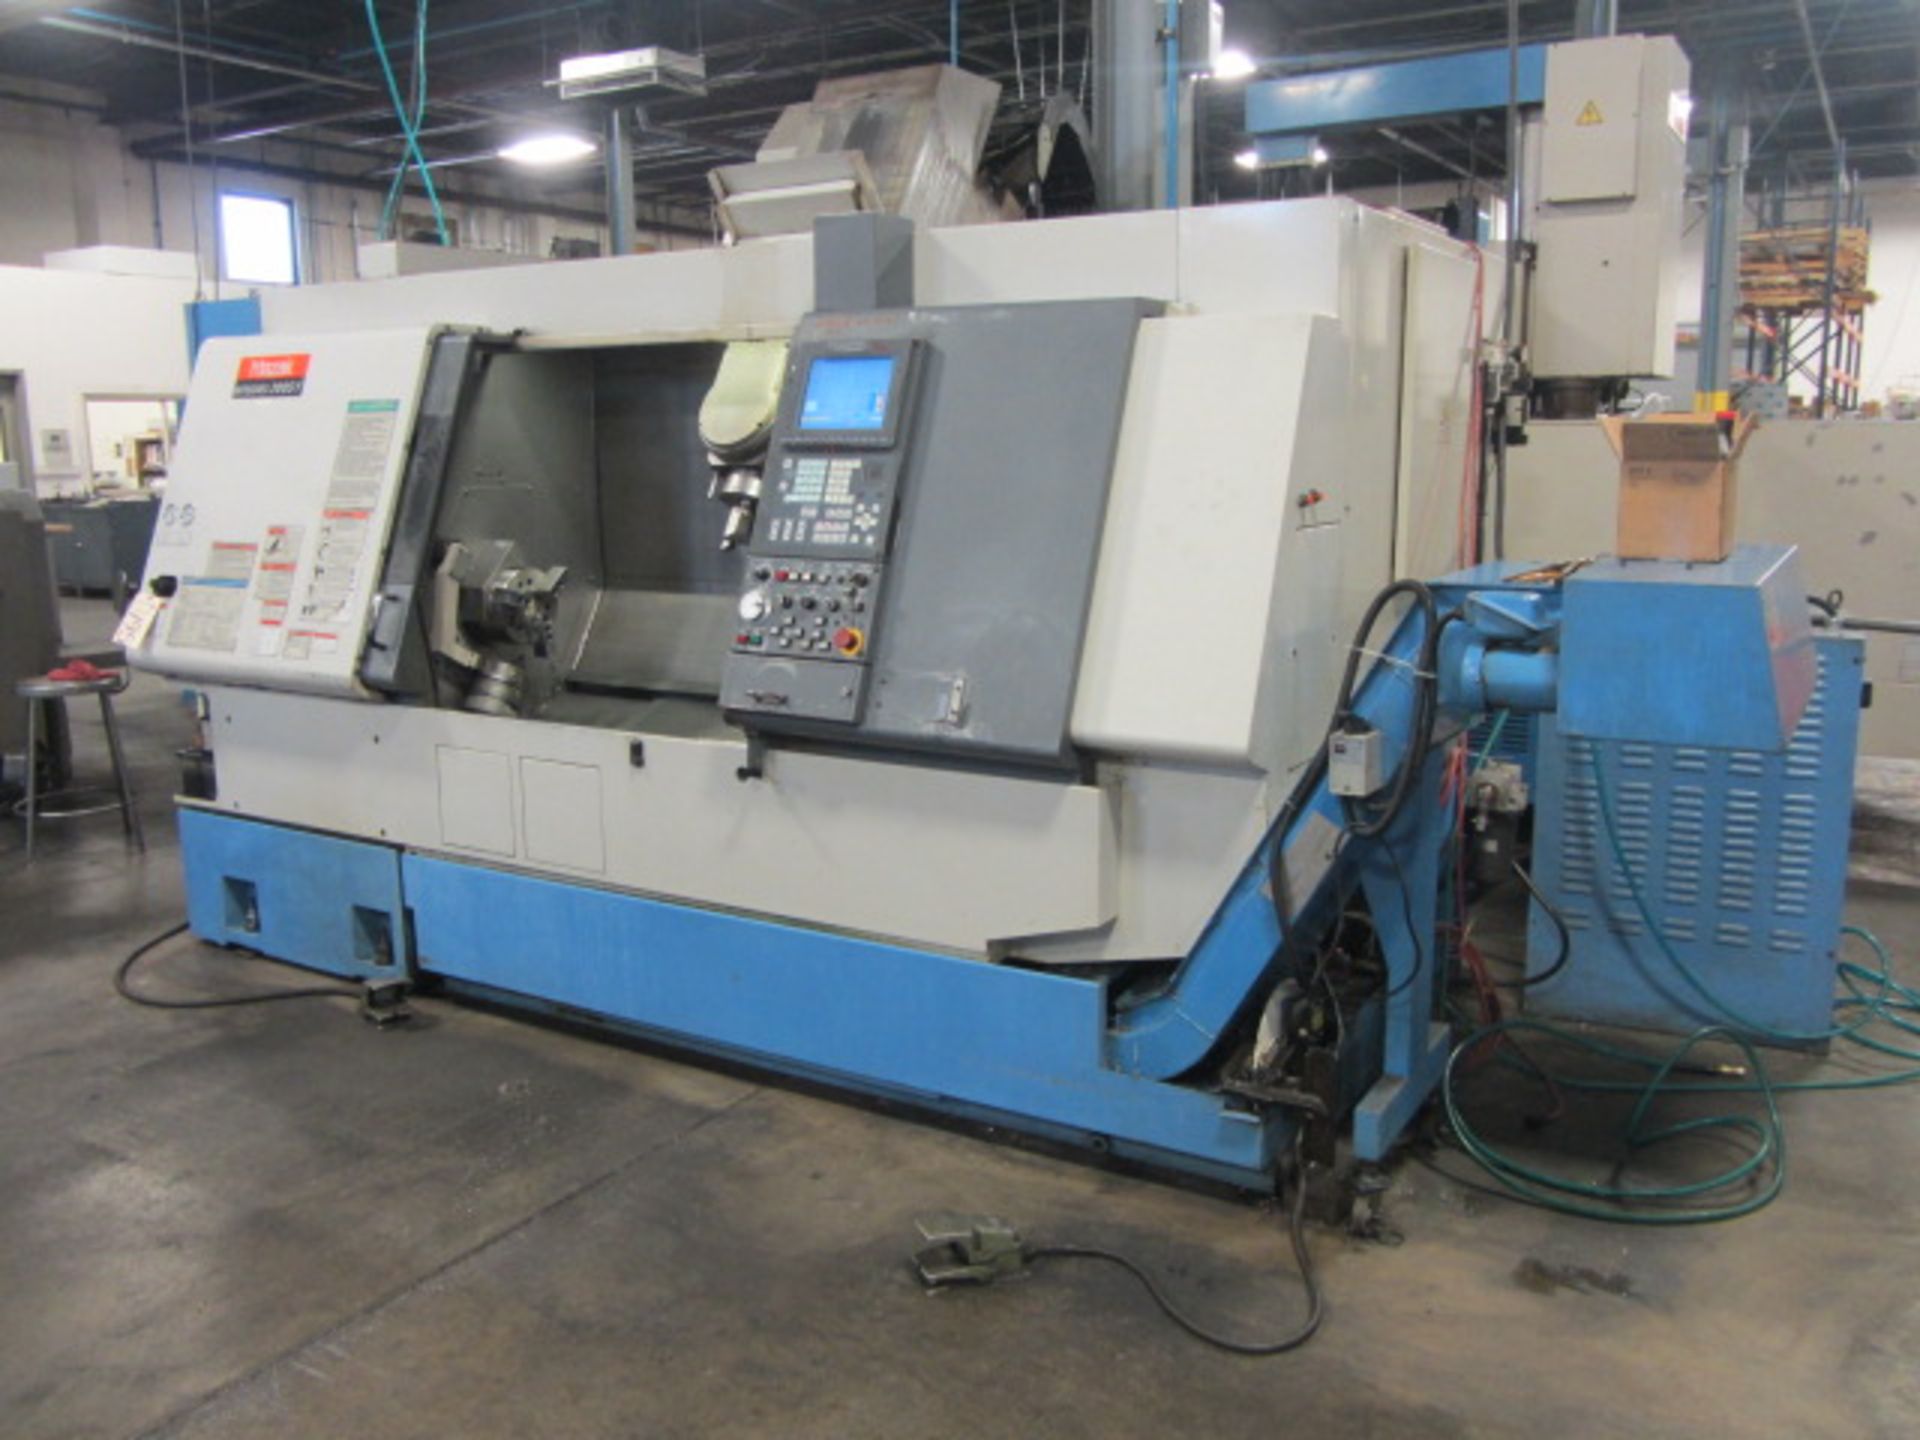 Mazak Integrex 200SY CNC Turning Center with Sub-Spindle, Milling & Y-Axis, 8'' Chuck on Main - Image 7 of 9